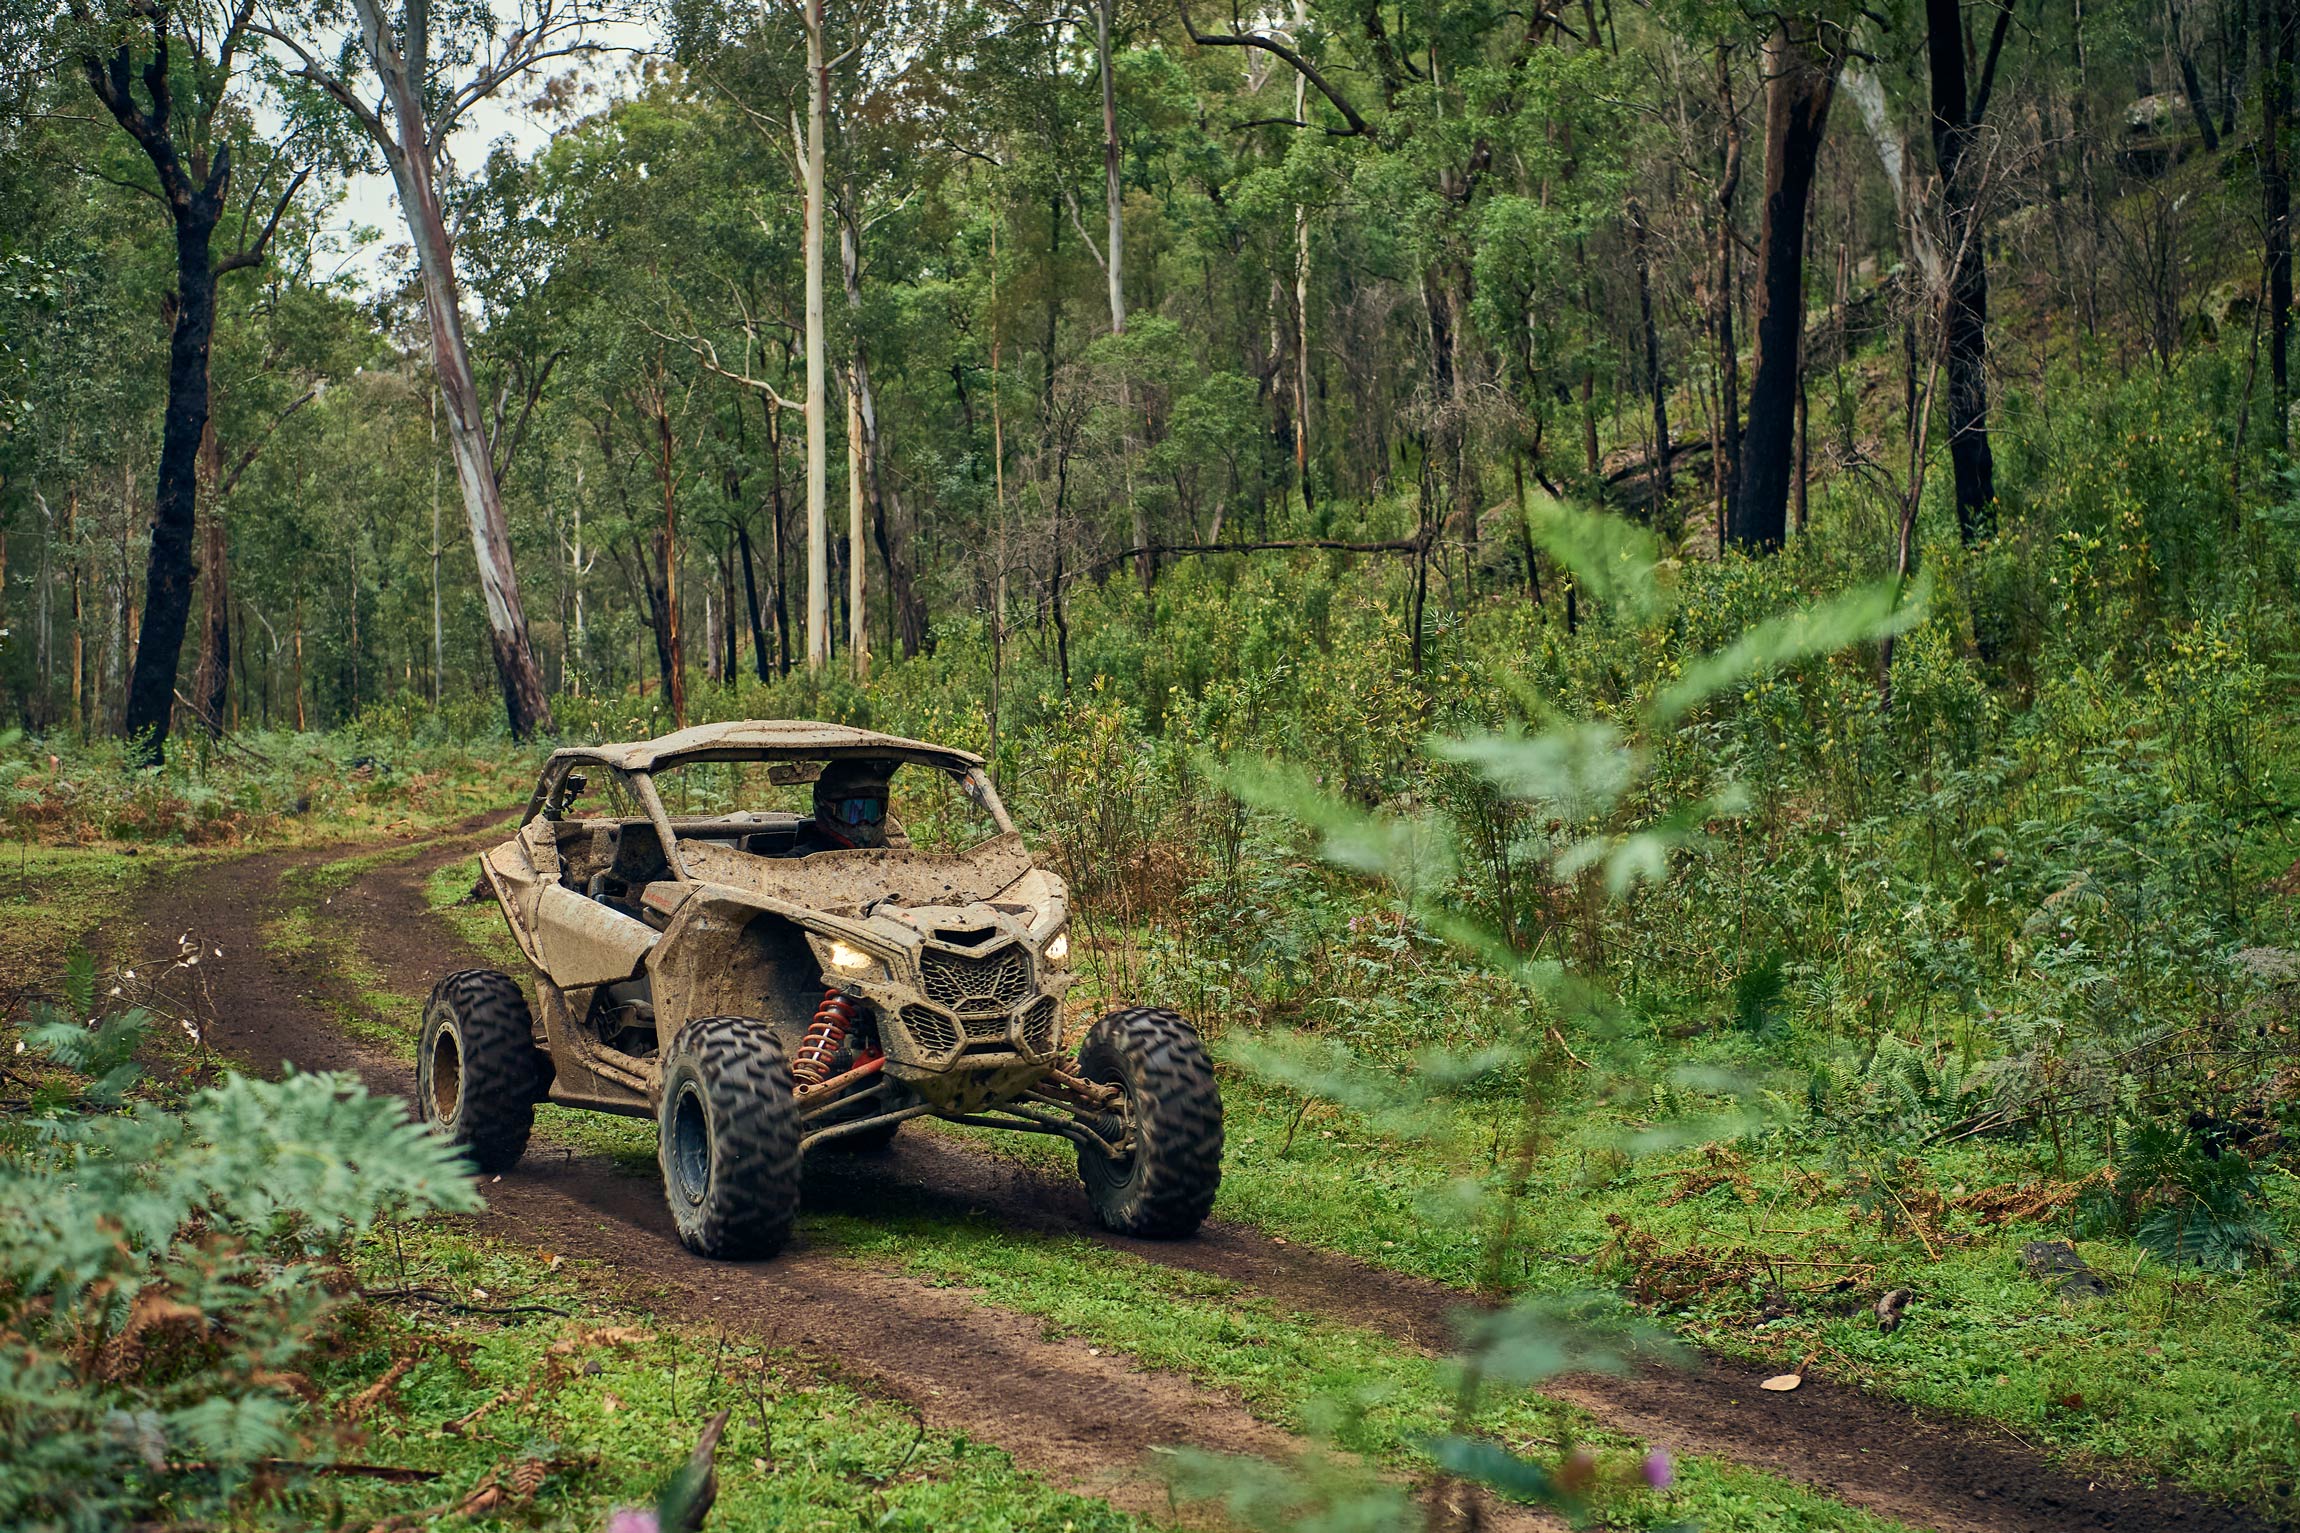 A side-by-side vehicle being driven on a muddy mountain trail